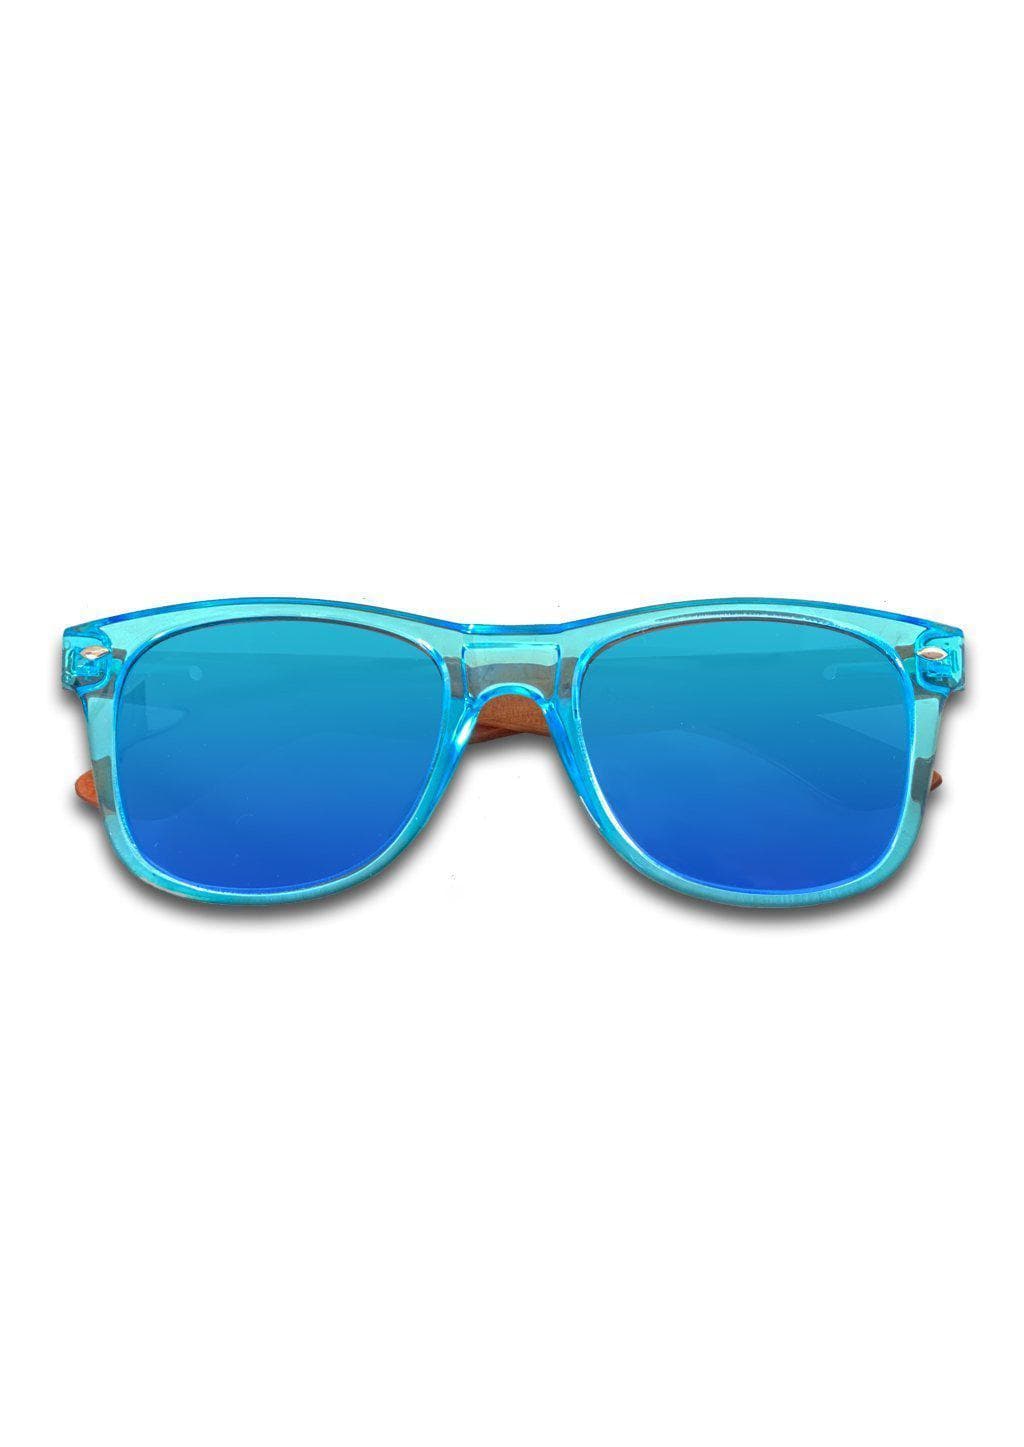 Eyewood Wayfarer - Sapphire - Transparent blue frame with blue mirror lenses and temples made of wood.